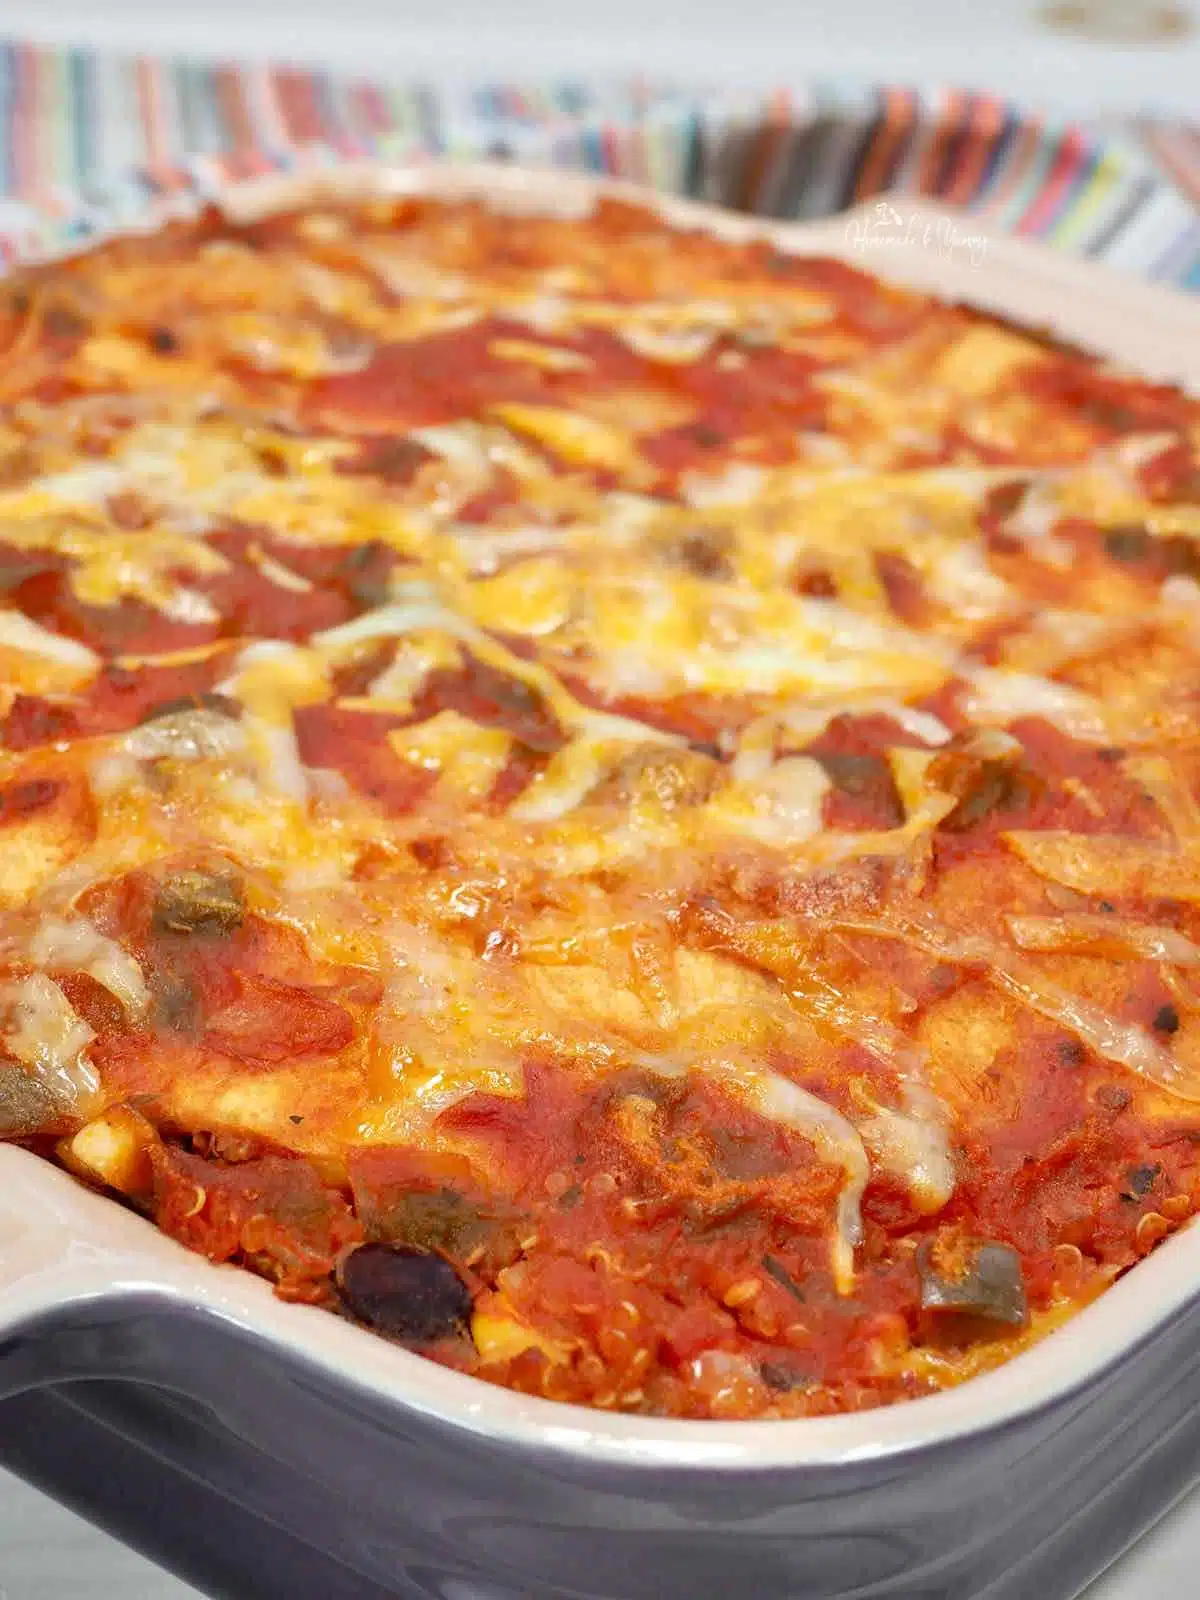 Mexican quinoa casserole right out of the oven.